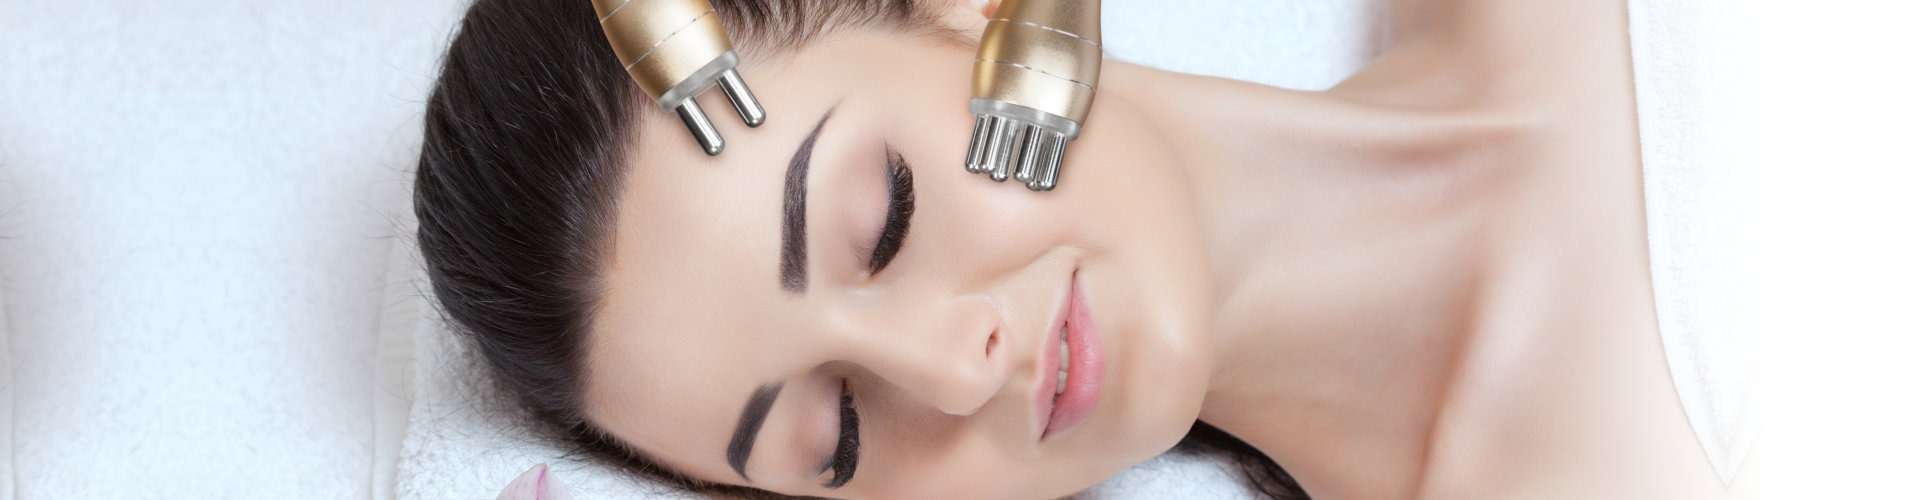 Rf lifting procedure in a beauty parlour